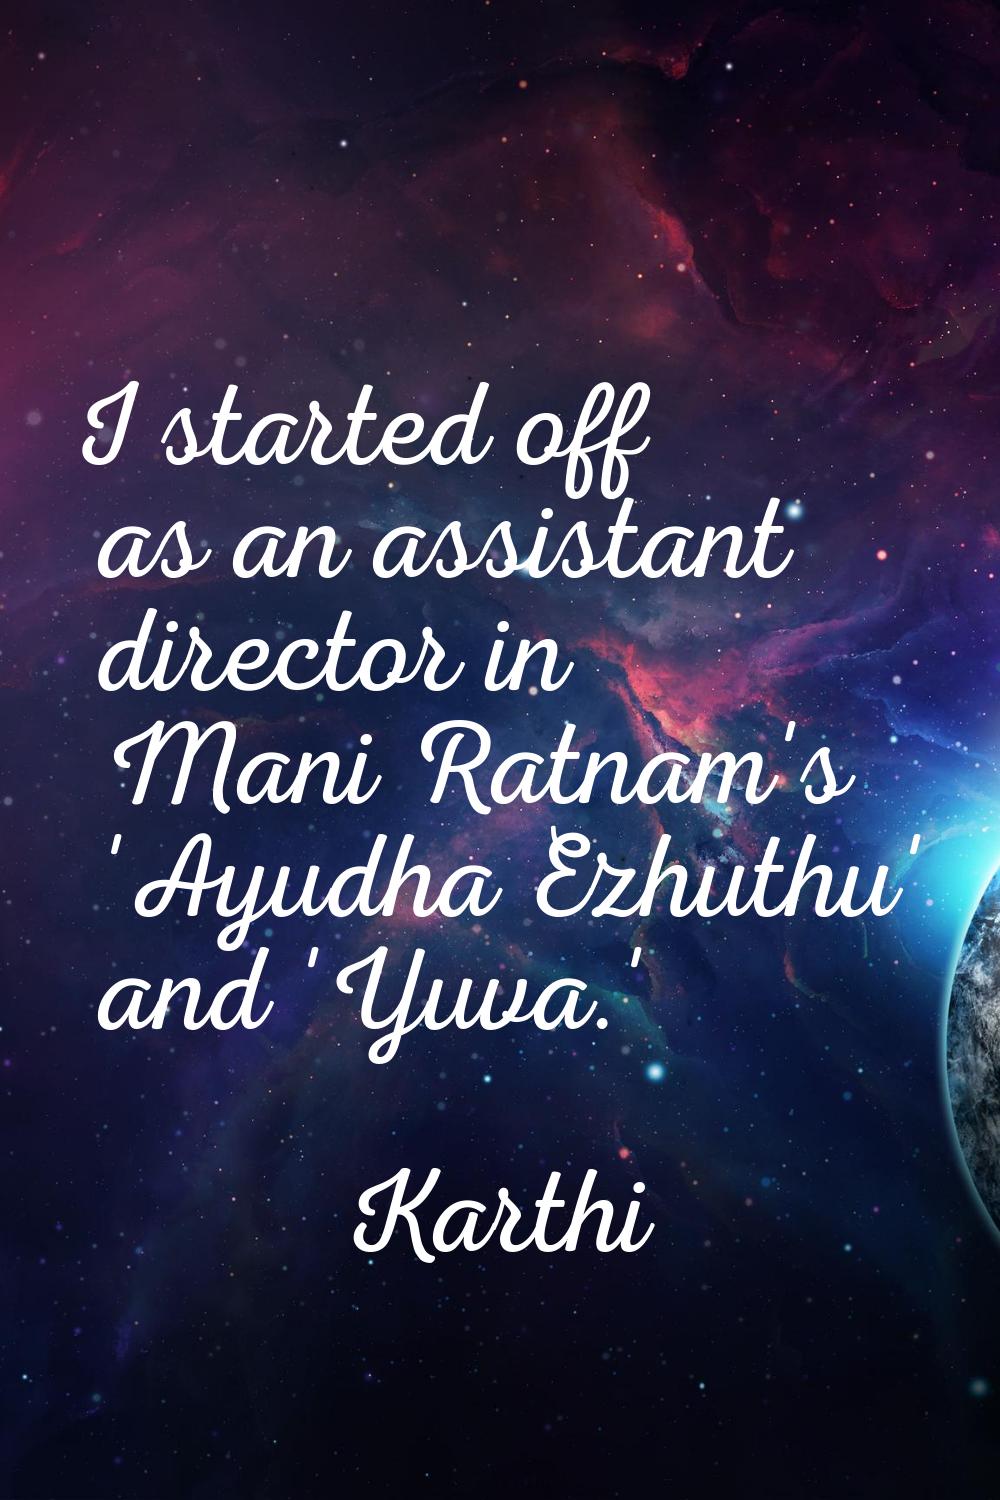 I started off as an assistant director in Mani Ratnam's 'Ayudha Ezhuthu' and 'Yuva.'